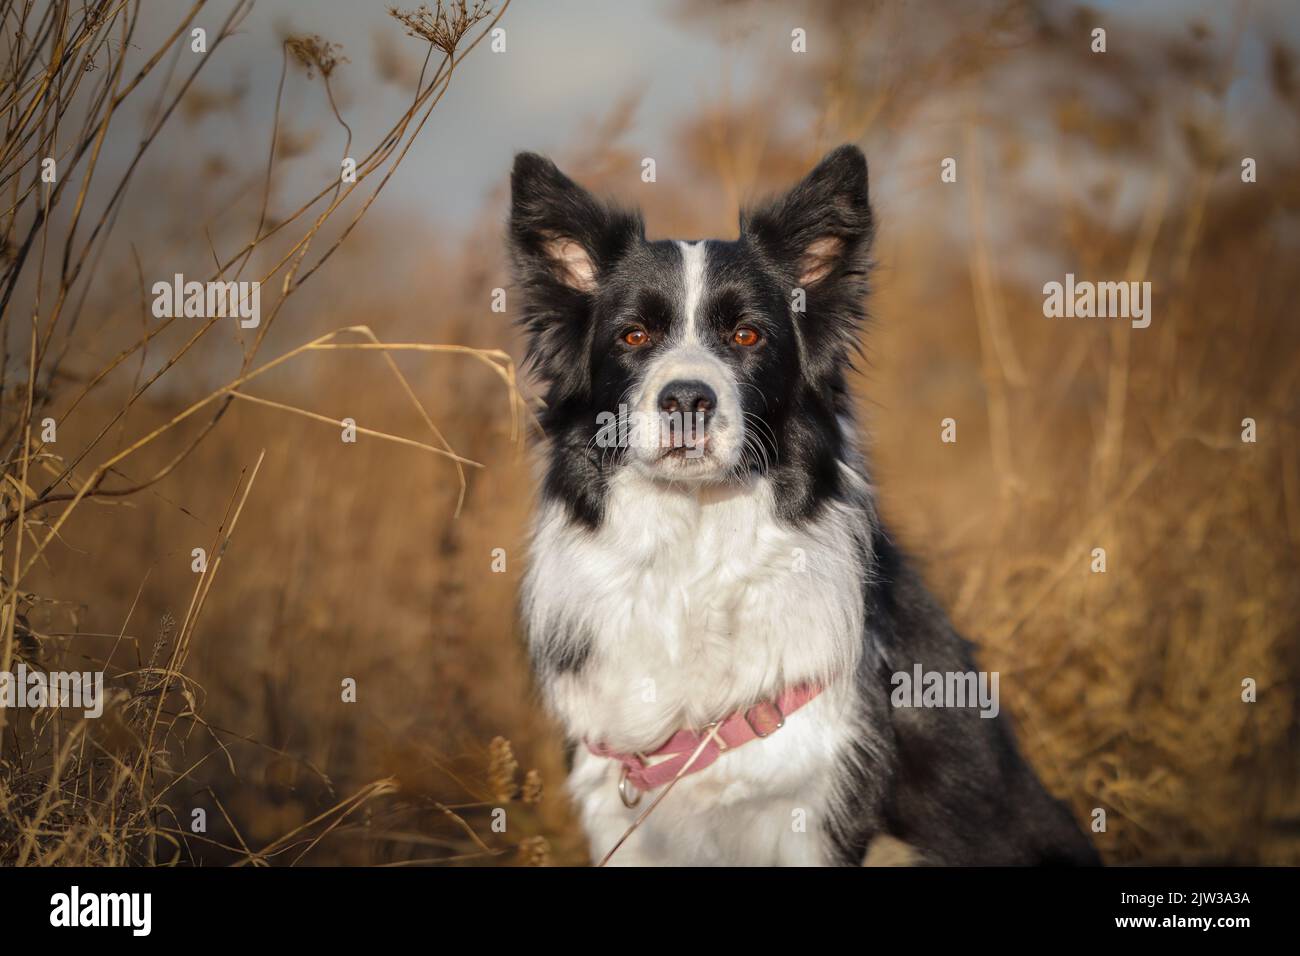 Front Portrait of Border Collie in Nature. Adorable Black and White Dog Outside. Cute Sheepdog in the Grass Field. Stock Photo